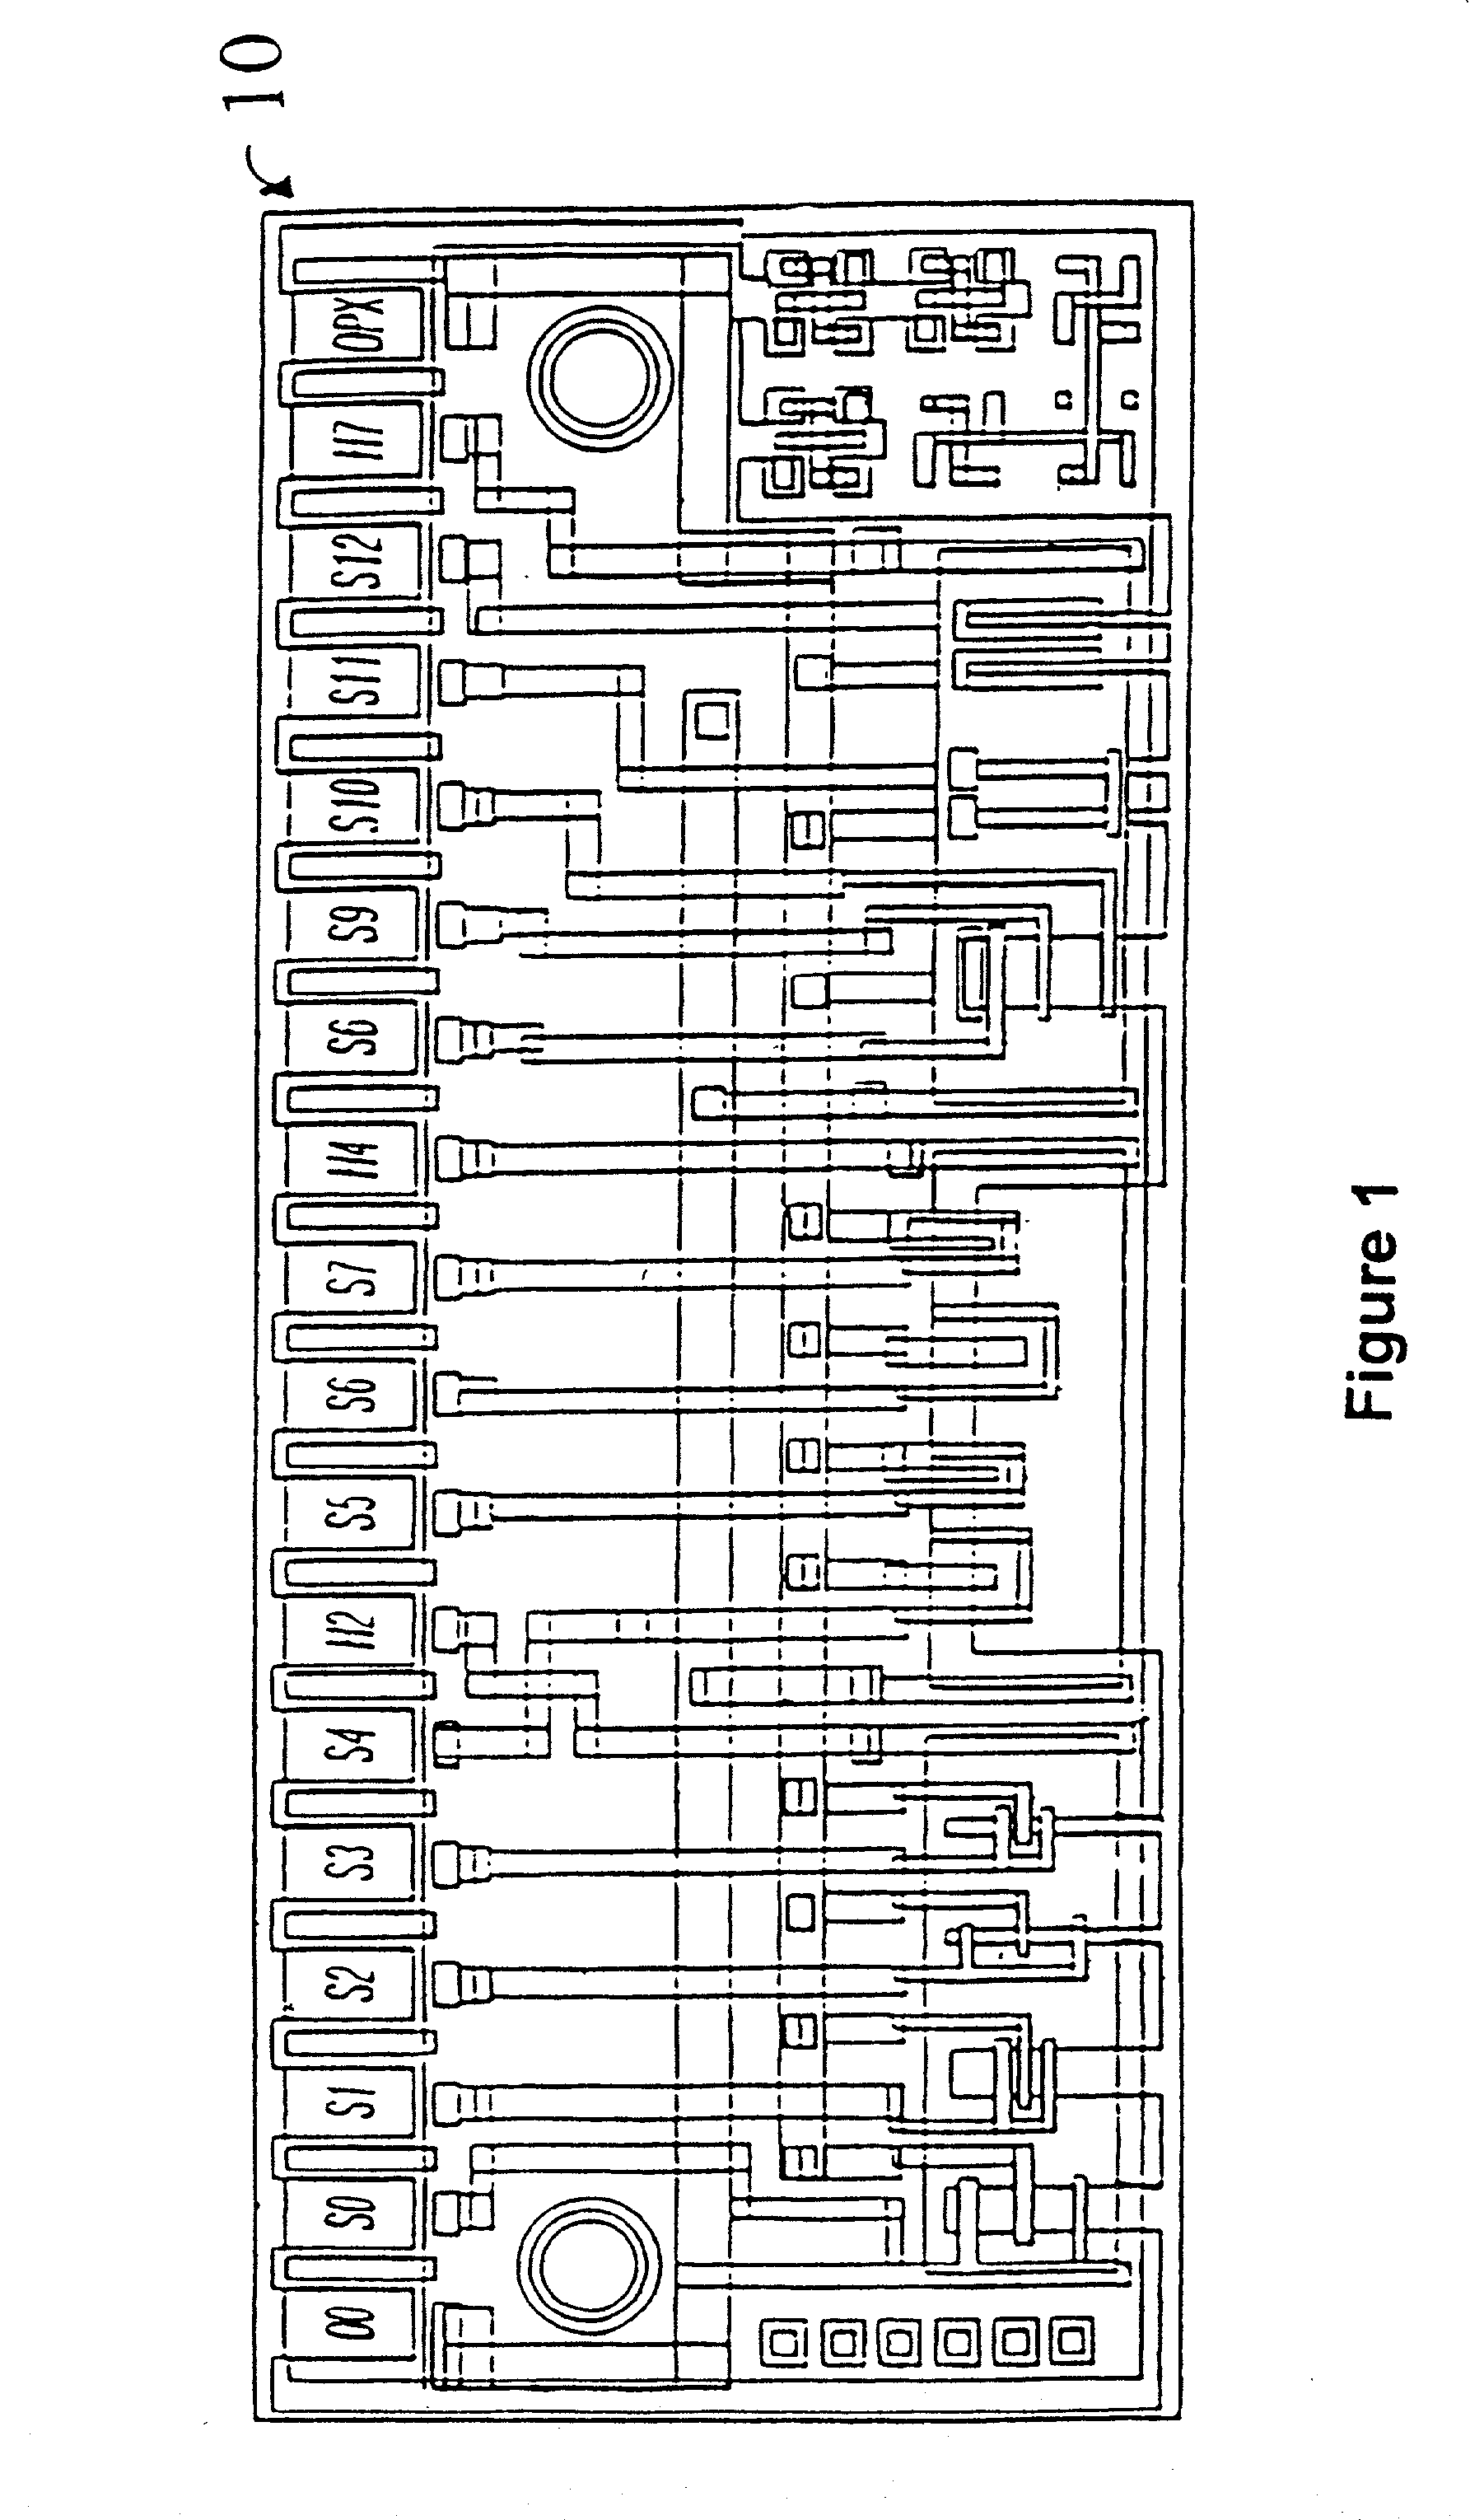 Method and apparatus for detecting illicit substances